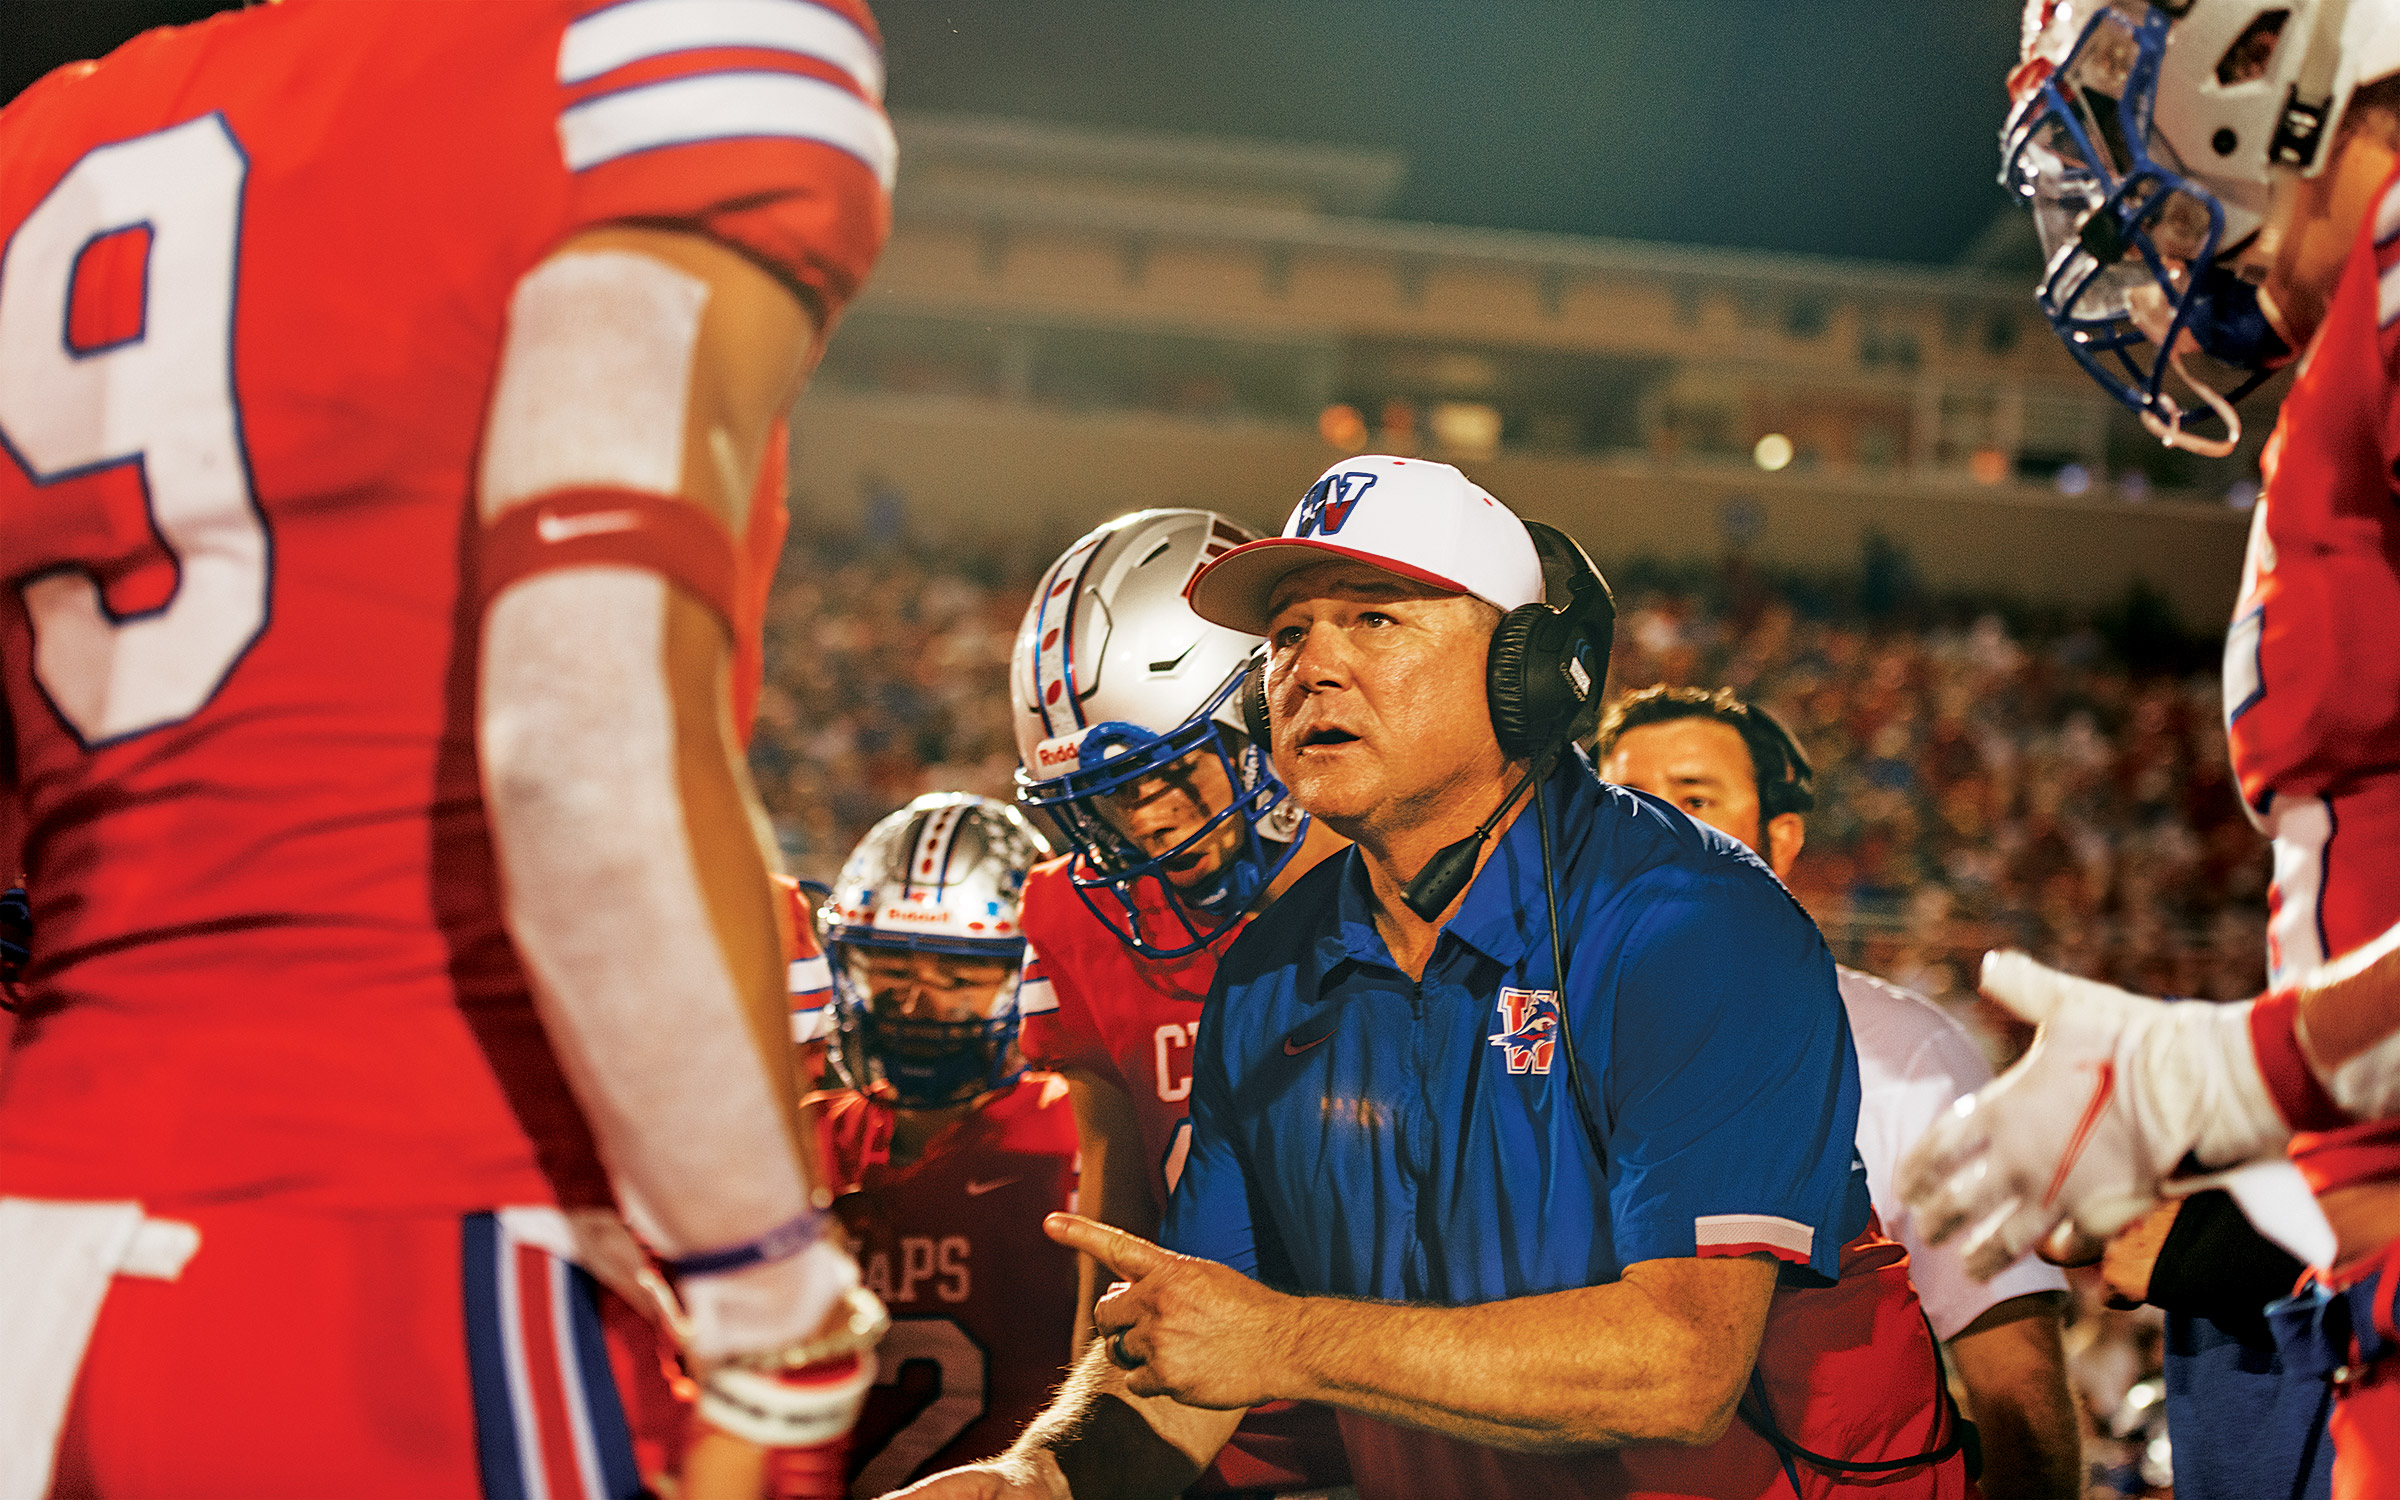 Westlake High School Football Coach Todd Dodge Might Be The Best